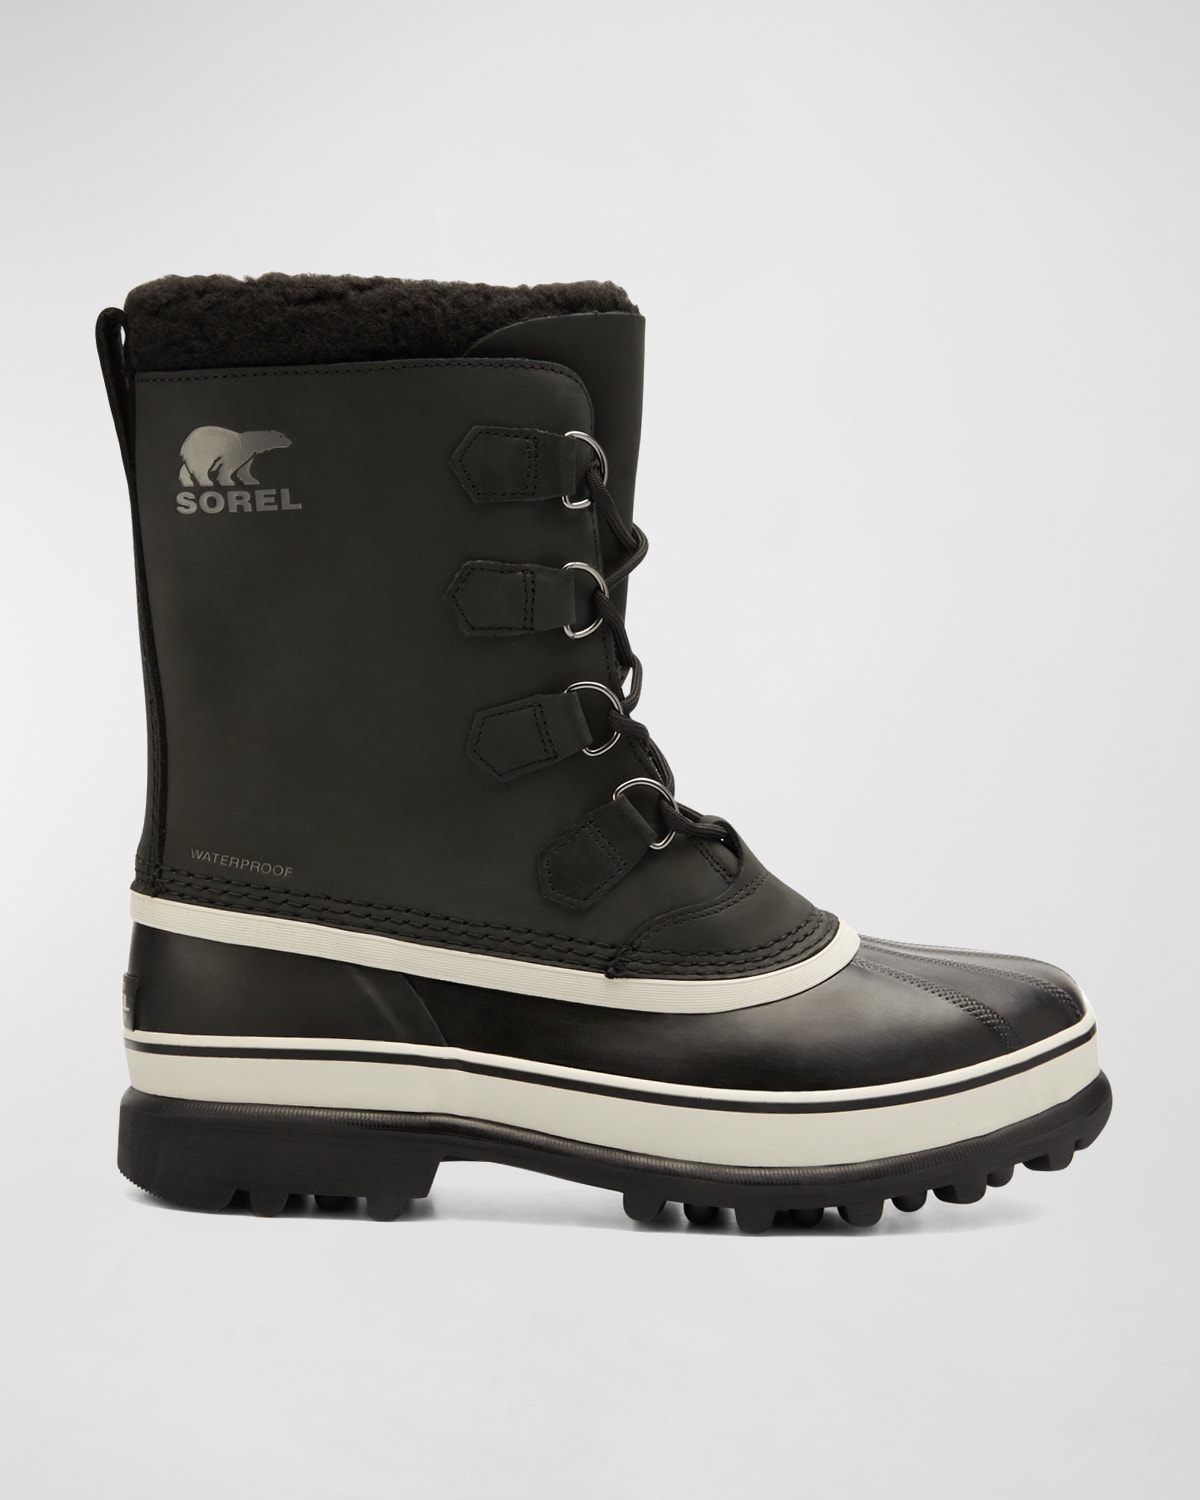 Men's Caribou™ Waterproof Leather Snow Boots